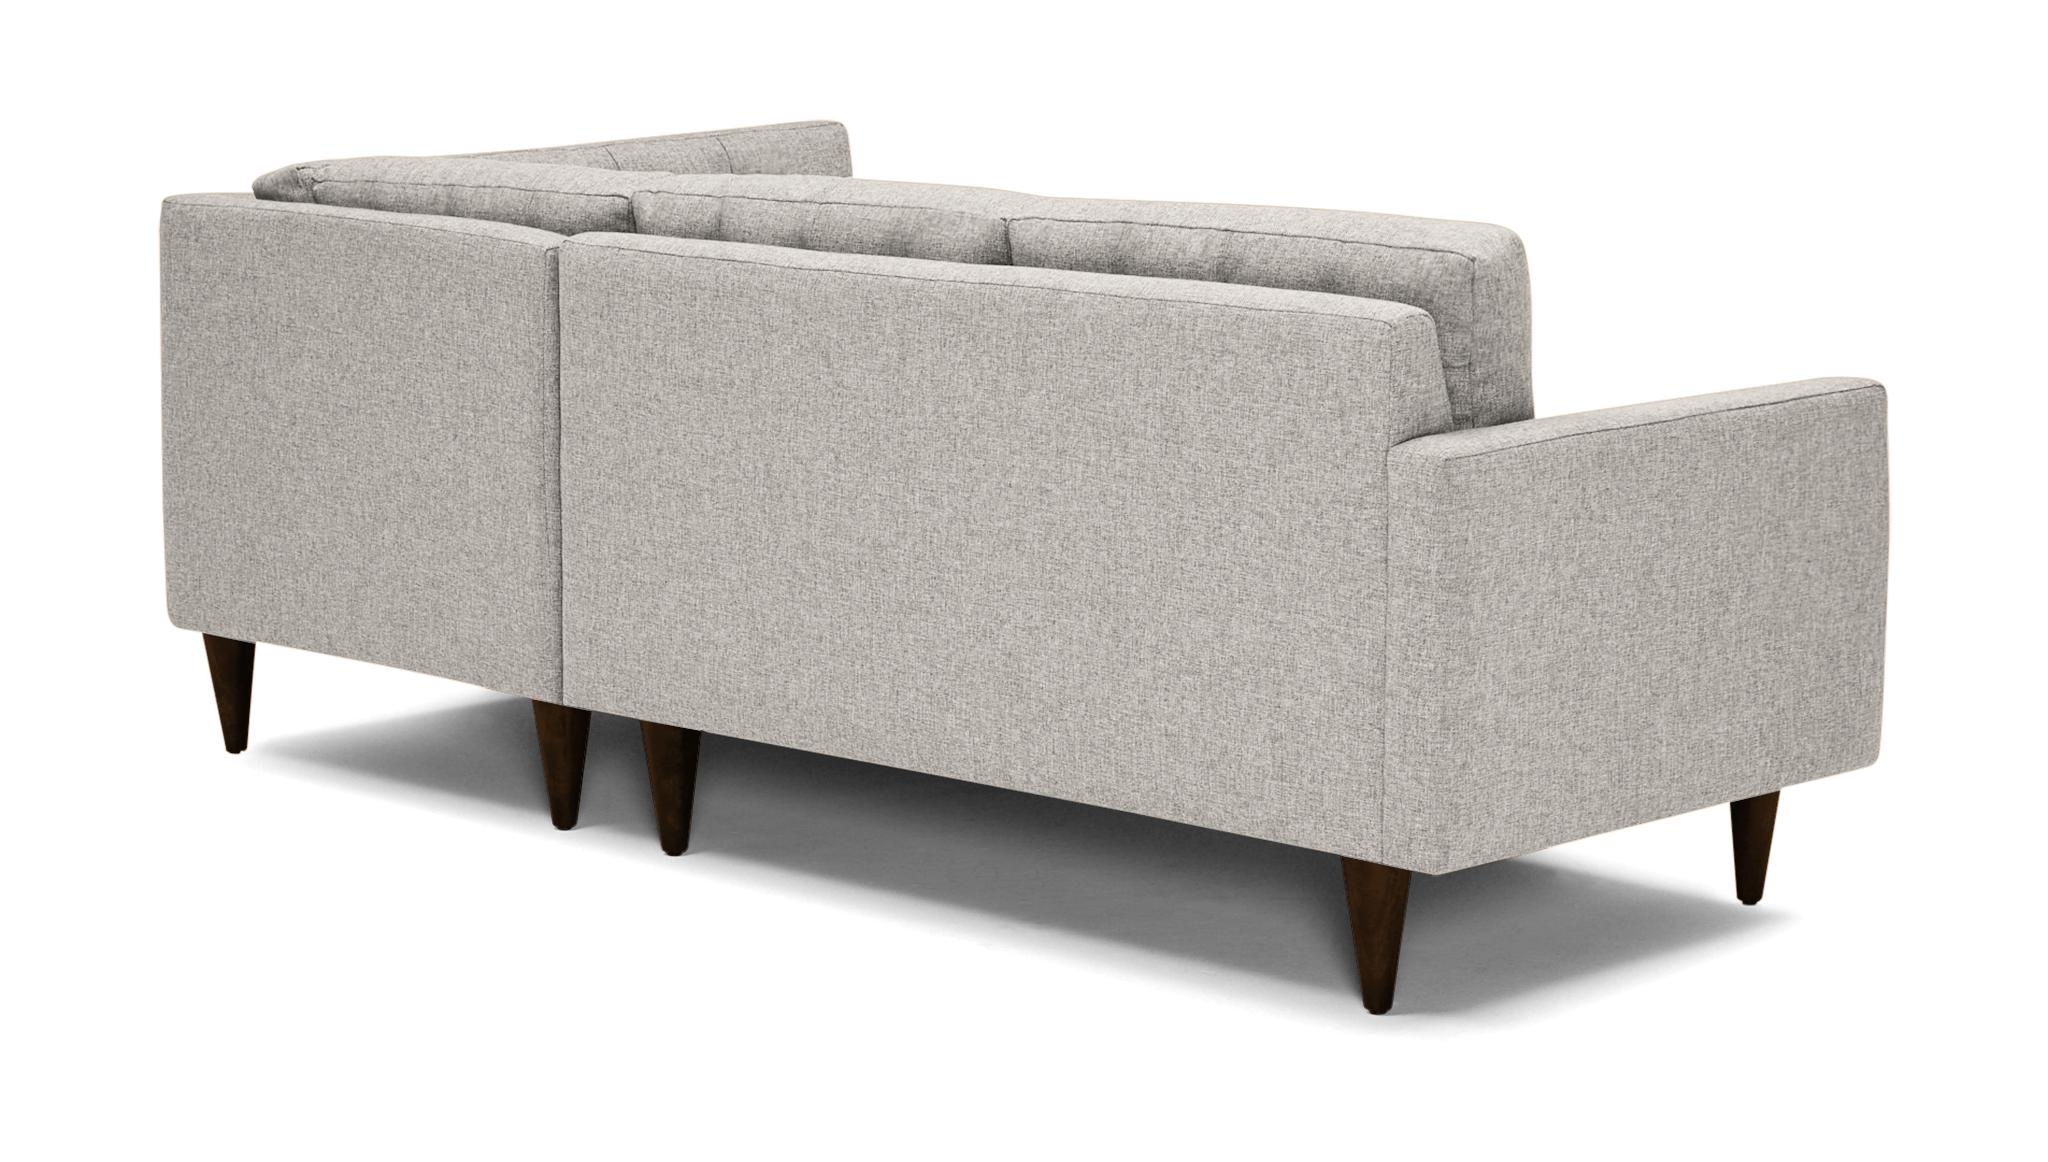 Beige/White Eliot Mid Century Modern Apartment Sectional with Bumper - Lucky Divine - Mocha - Left - Image 2